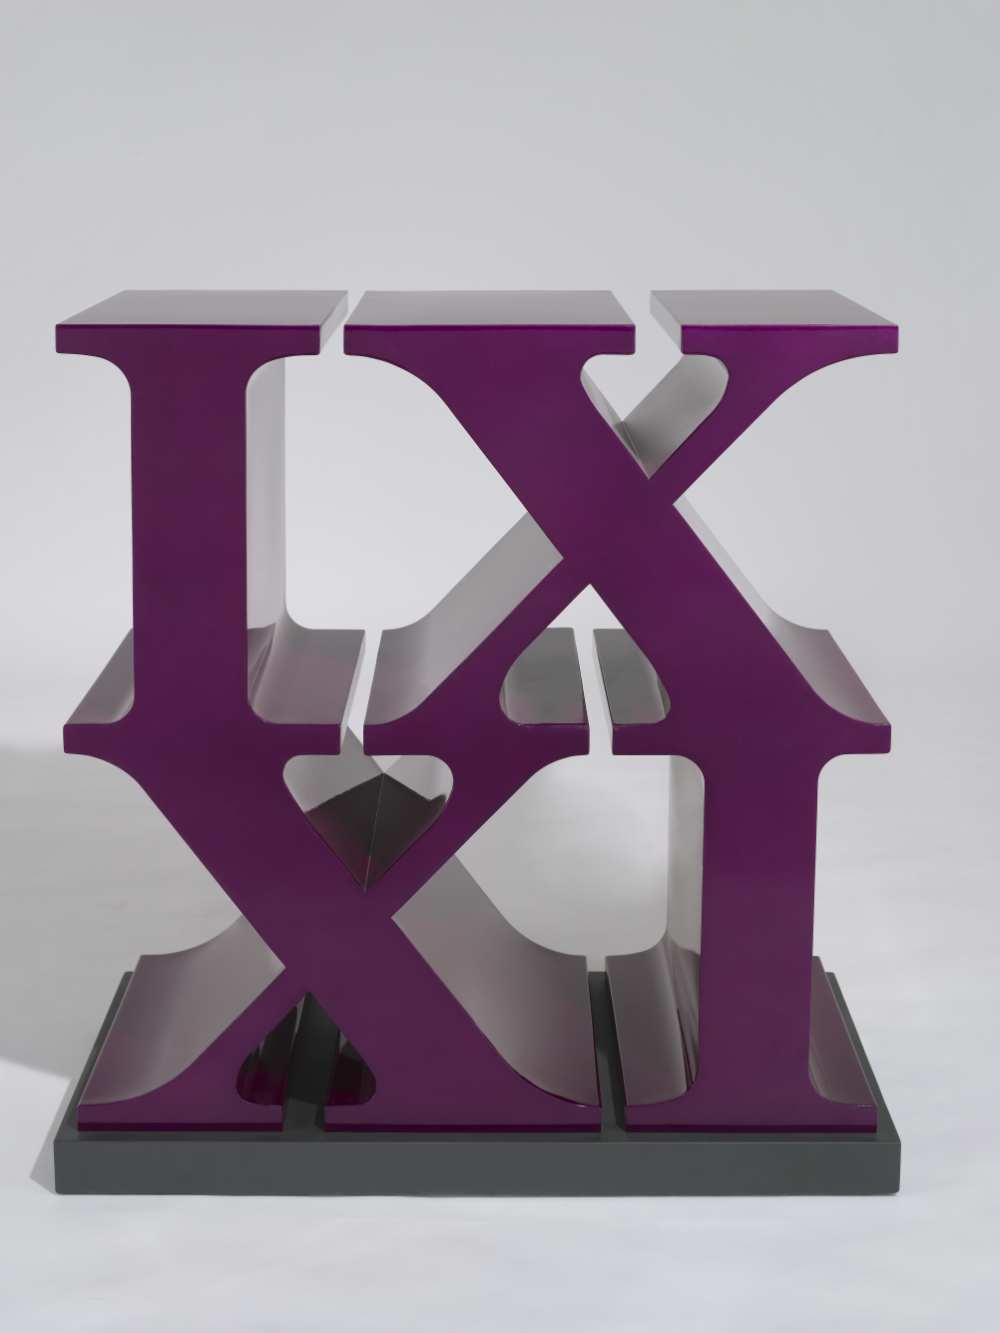 thumbnail of IX XI made of painted aluminum. date: 2011. dimensions: 3 ft x 3 ft x 18 inches